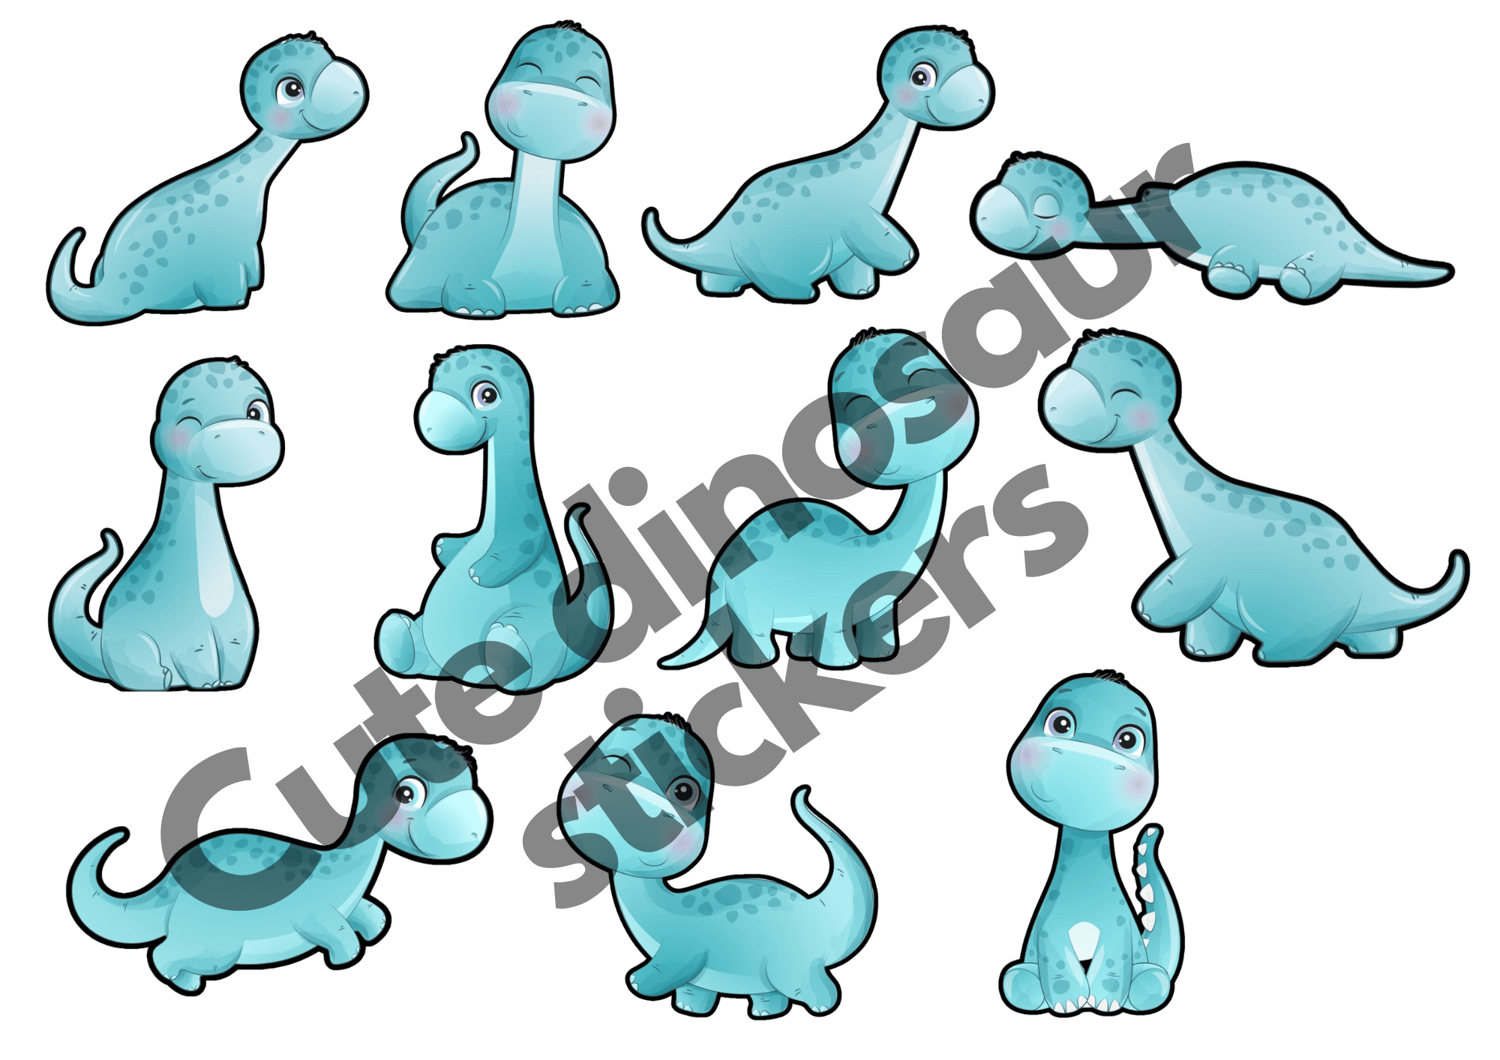 Cute Dinosaur Stickers, Dinosaur Print and Cut Digital PNG Sticker, 11 Fun  Sticker Designs, Instant Download, Printable Stickers. stickers - Payhip